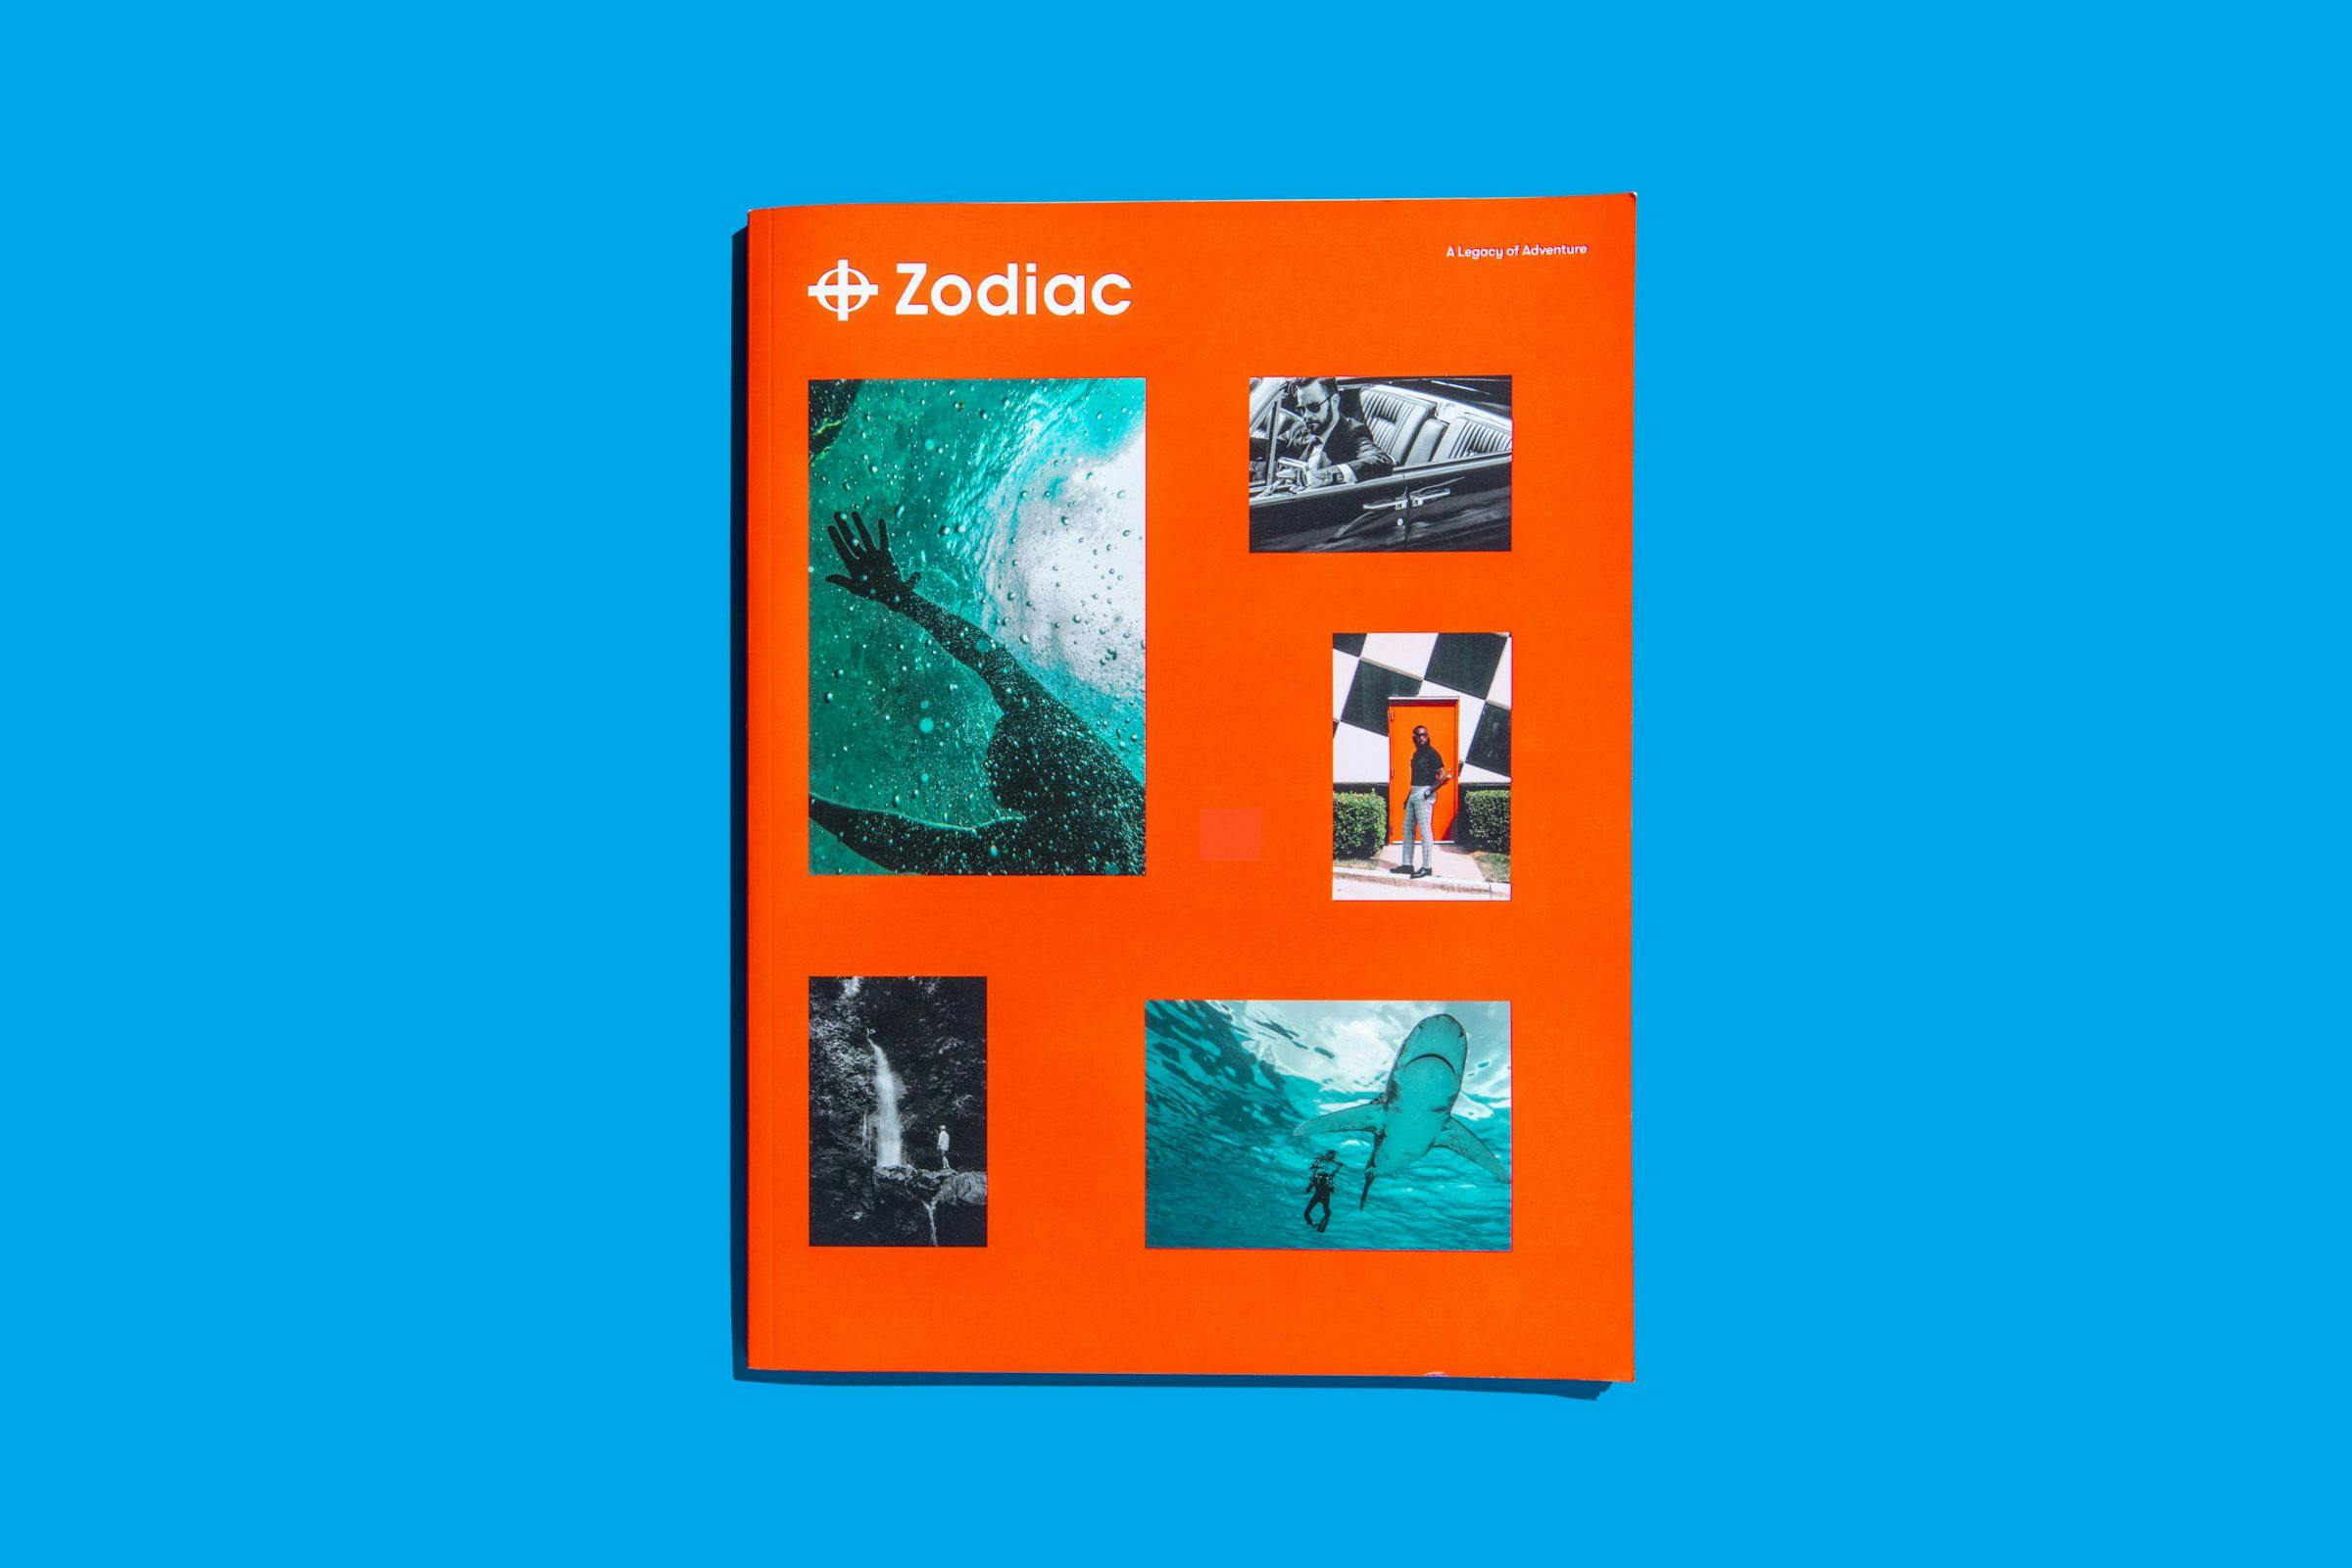 The front cover of the Zodiac Watches: Brand Book